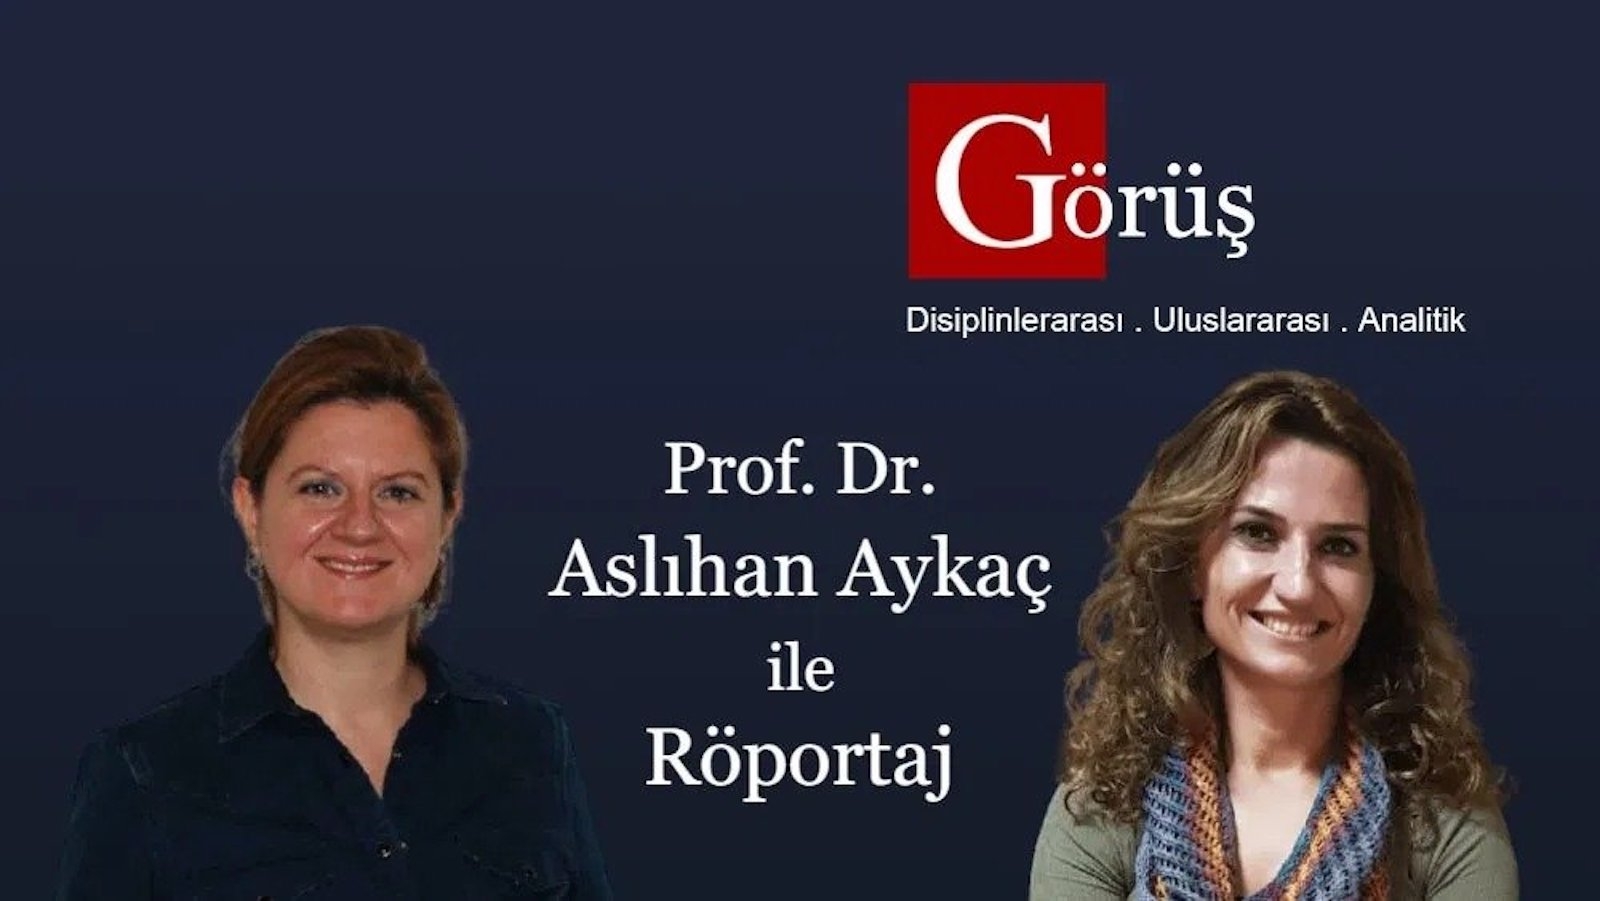 Aslıhan Aykaç commented on the Solidarity Economies